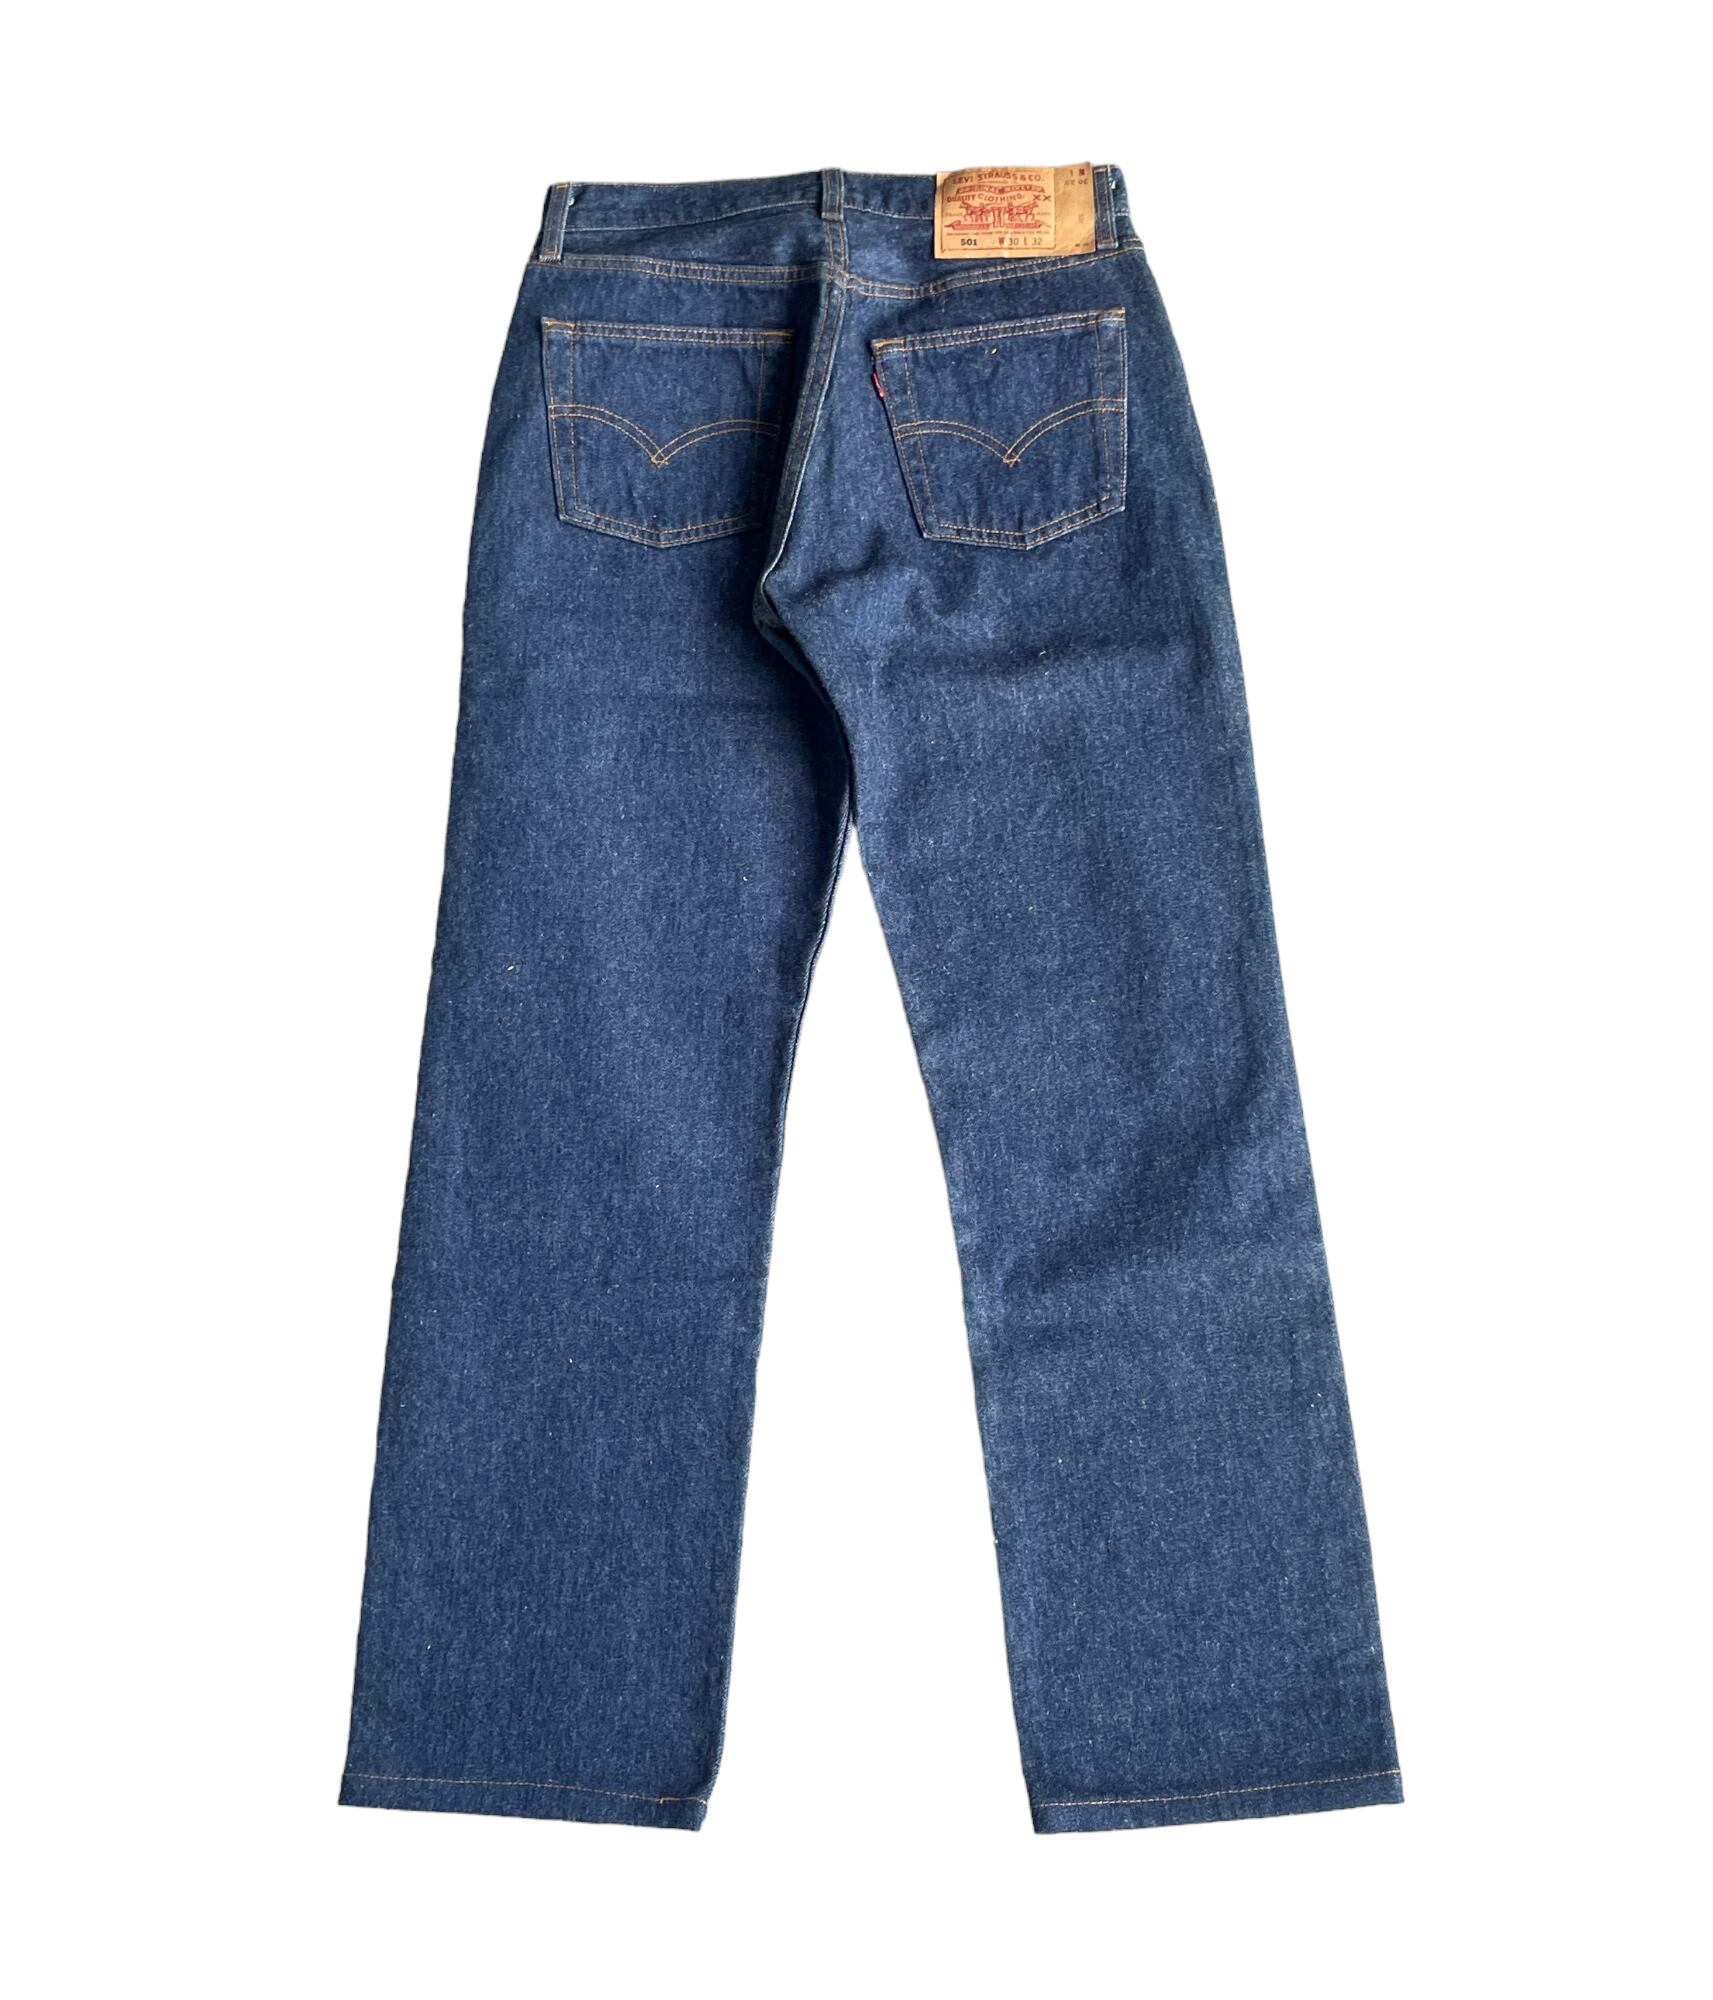 Vintage 90's Levi's 501 -W30/L32- | BEGGARS BANQUET公式通販サイト 古着・ヴィンテージ